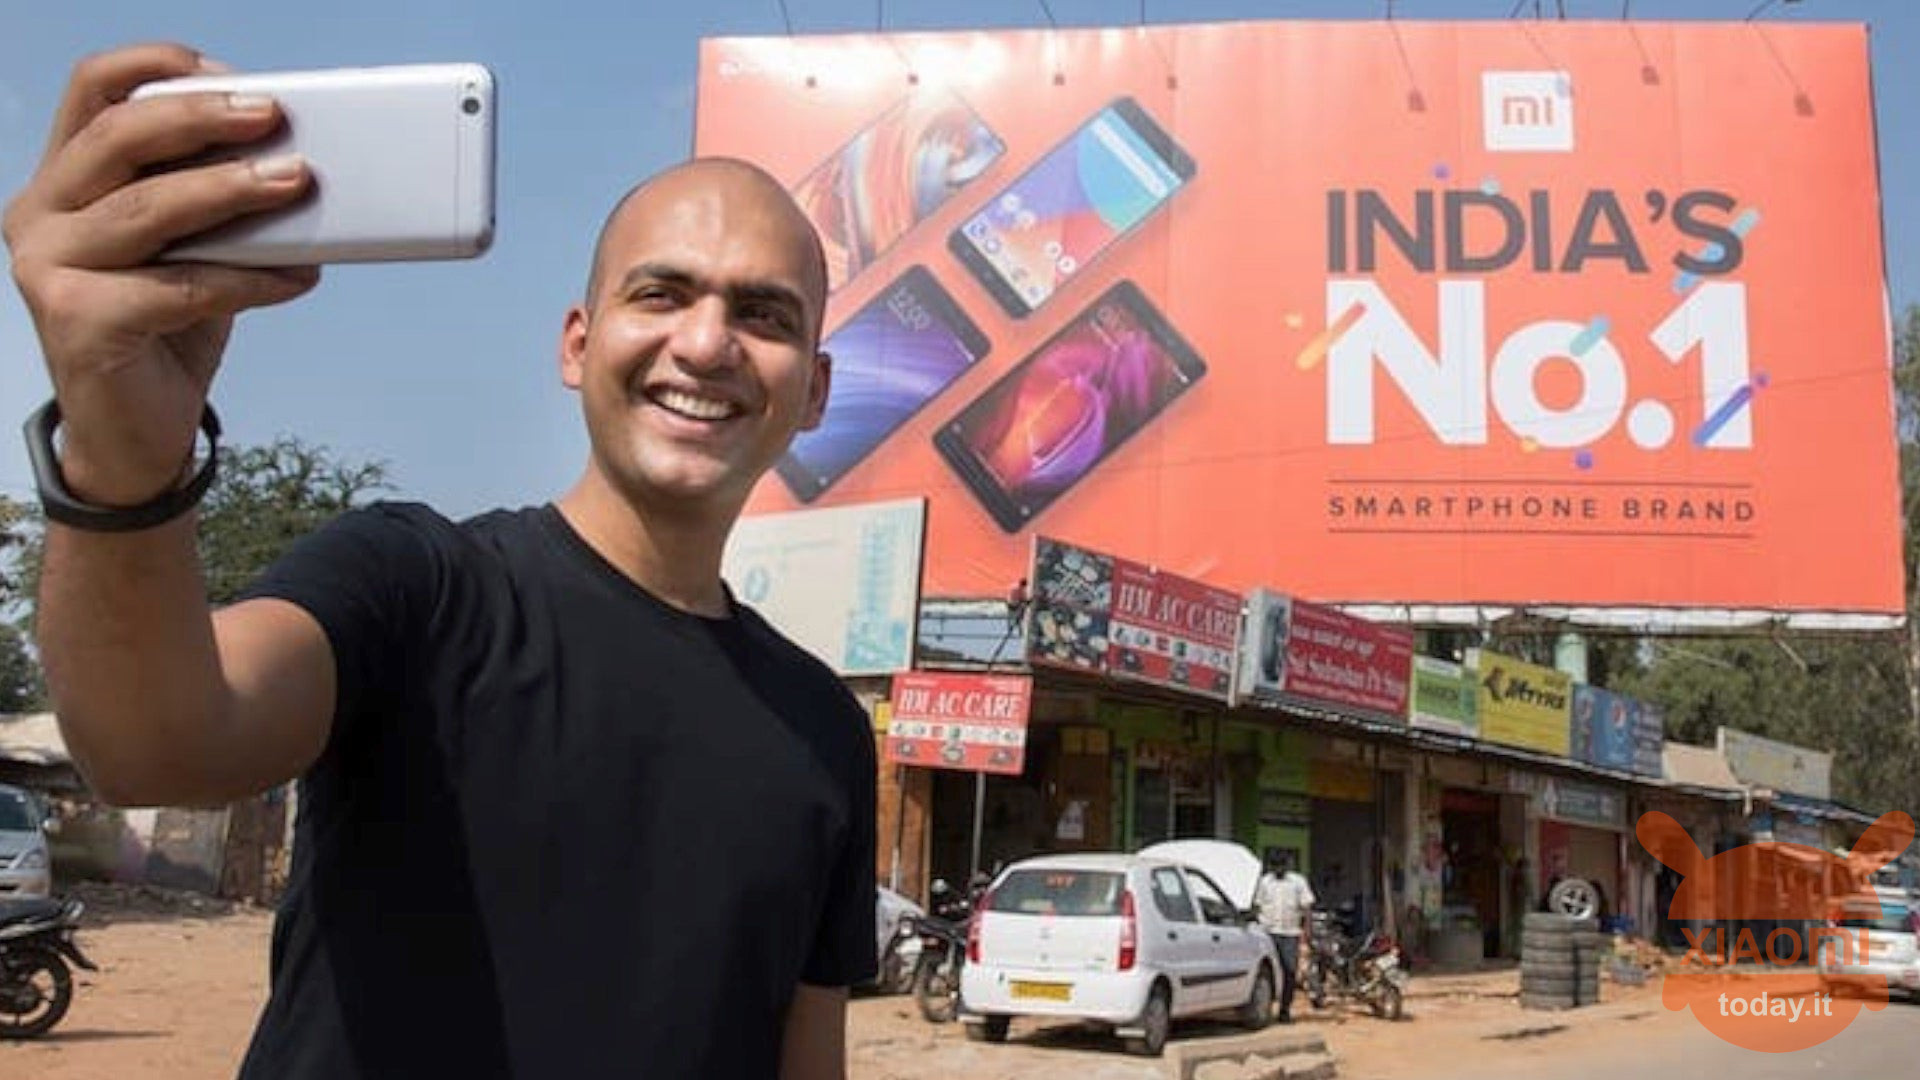 Xiaomi is safe from anti-China sentiment in India